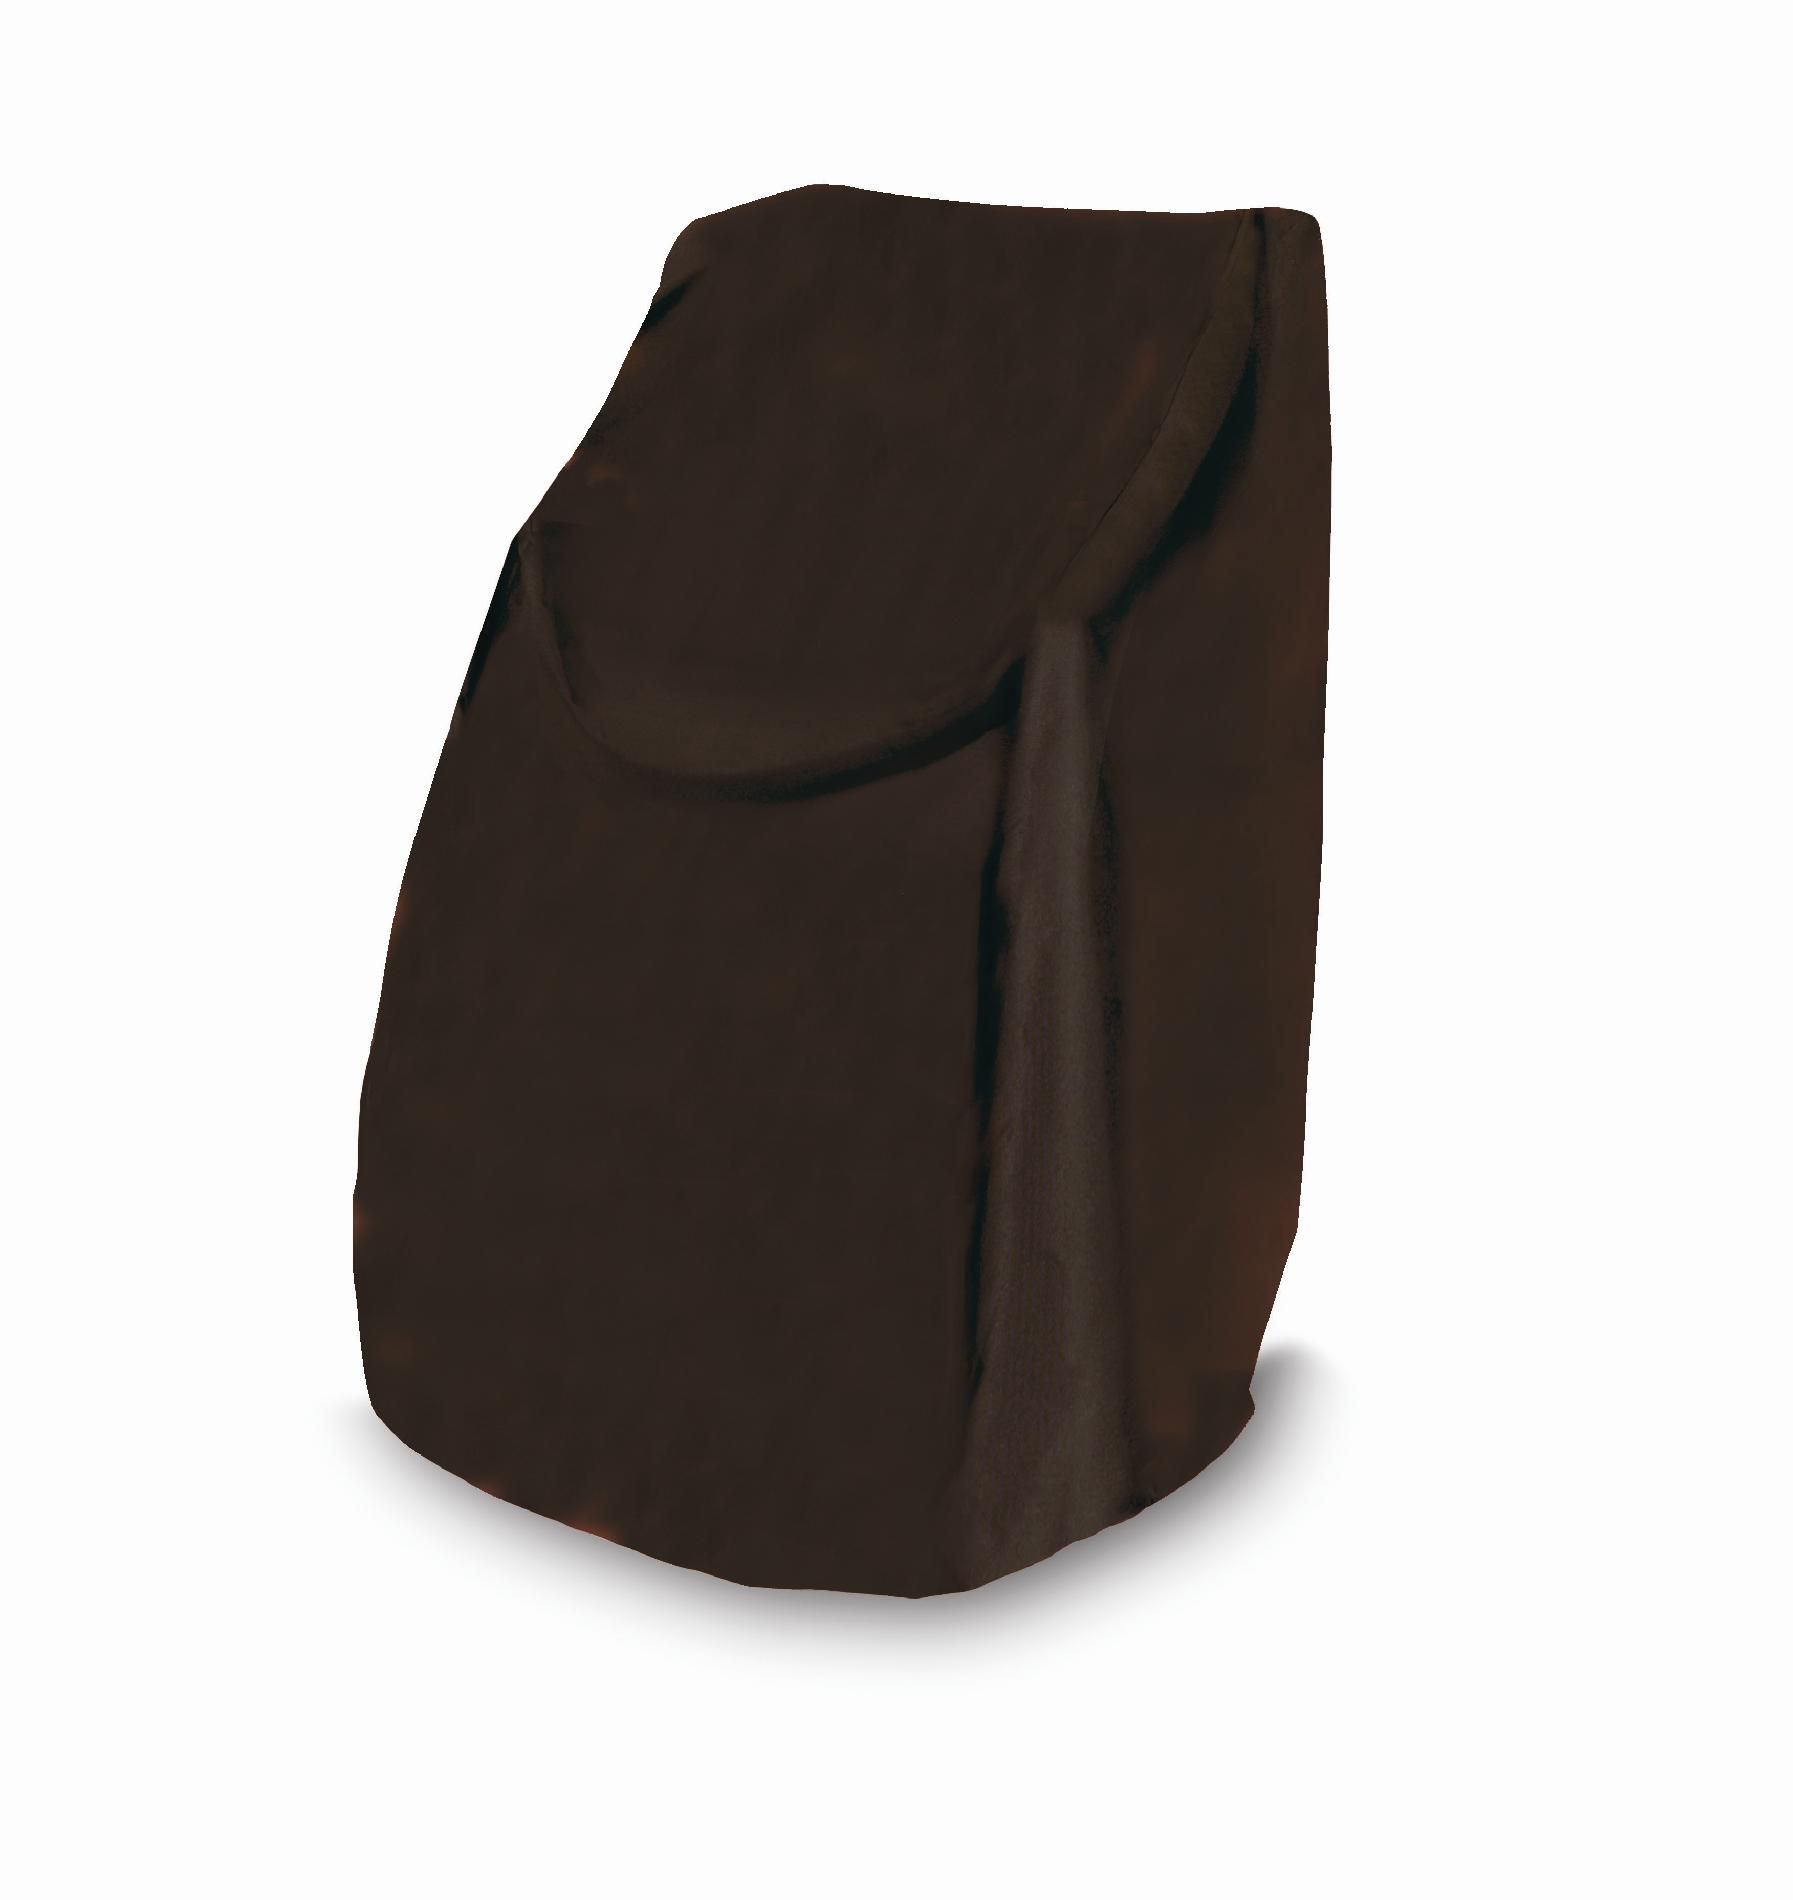 Smart Living 48" High Stack Chair Cover - Chocolate Brown